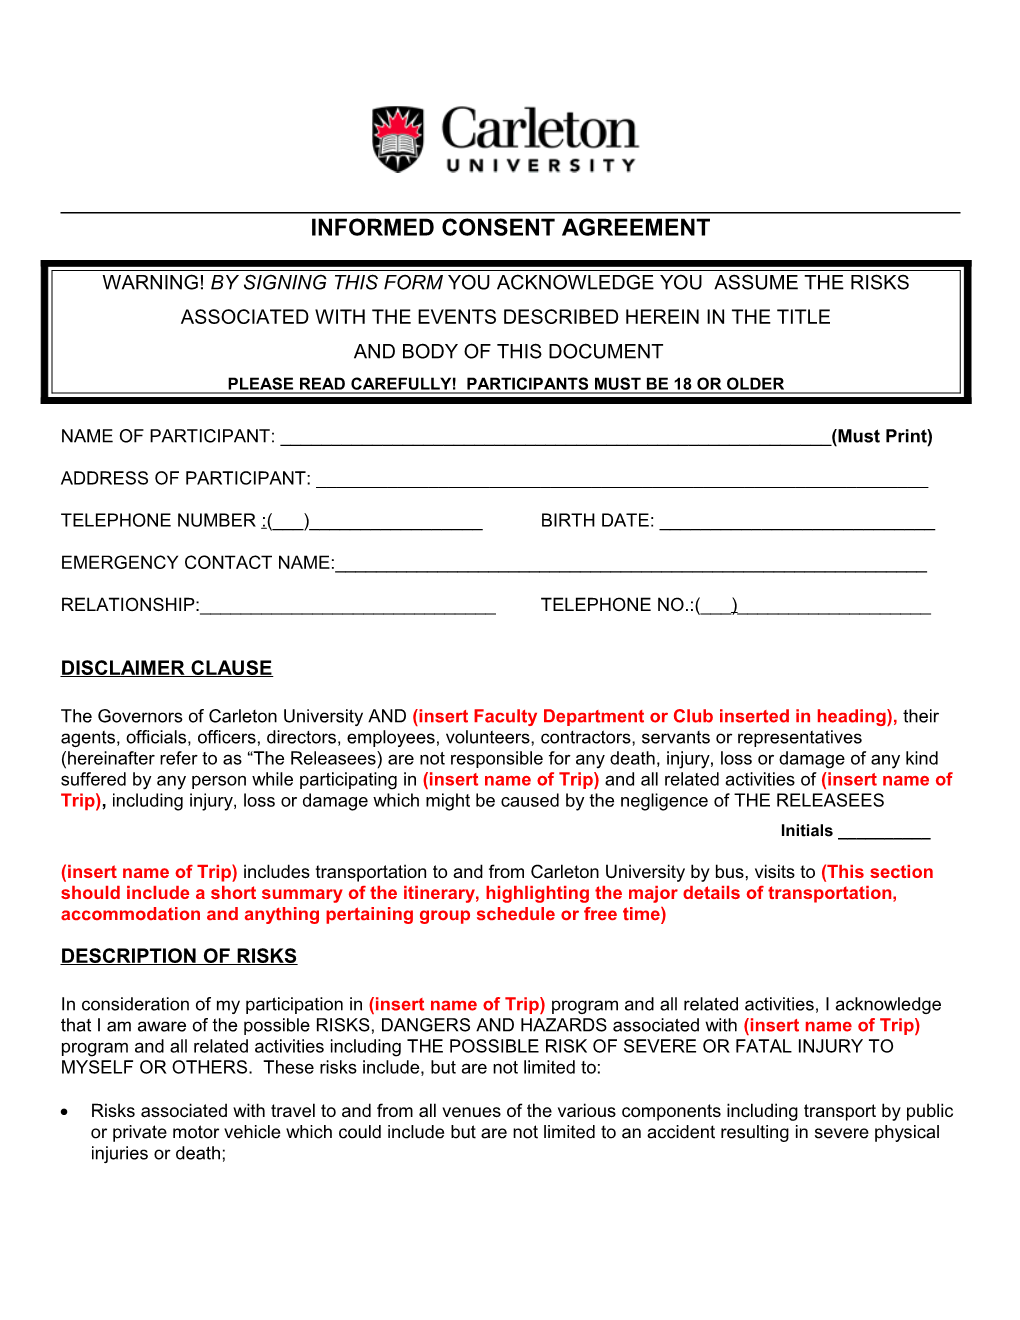 Informed Consent Agreement